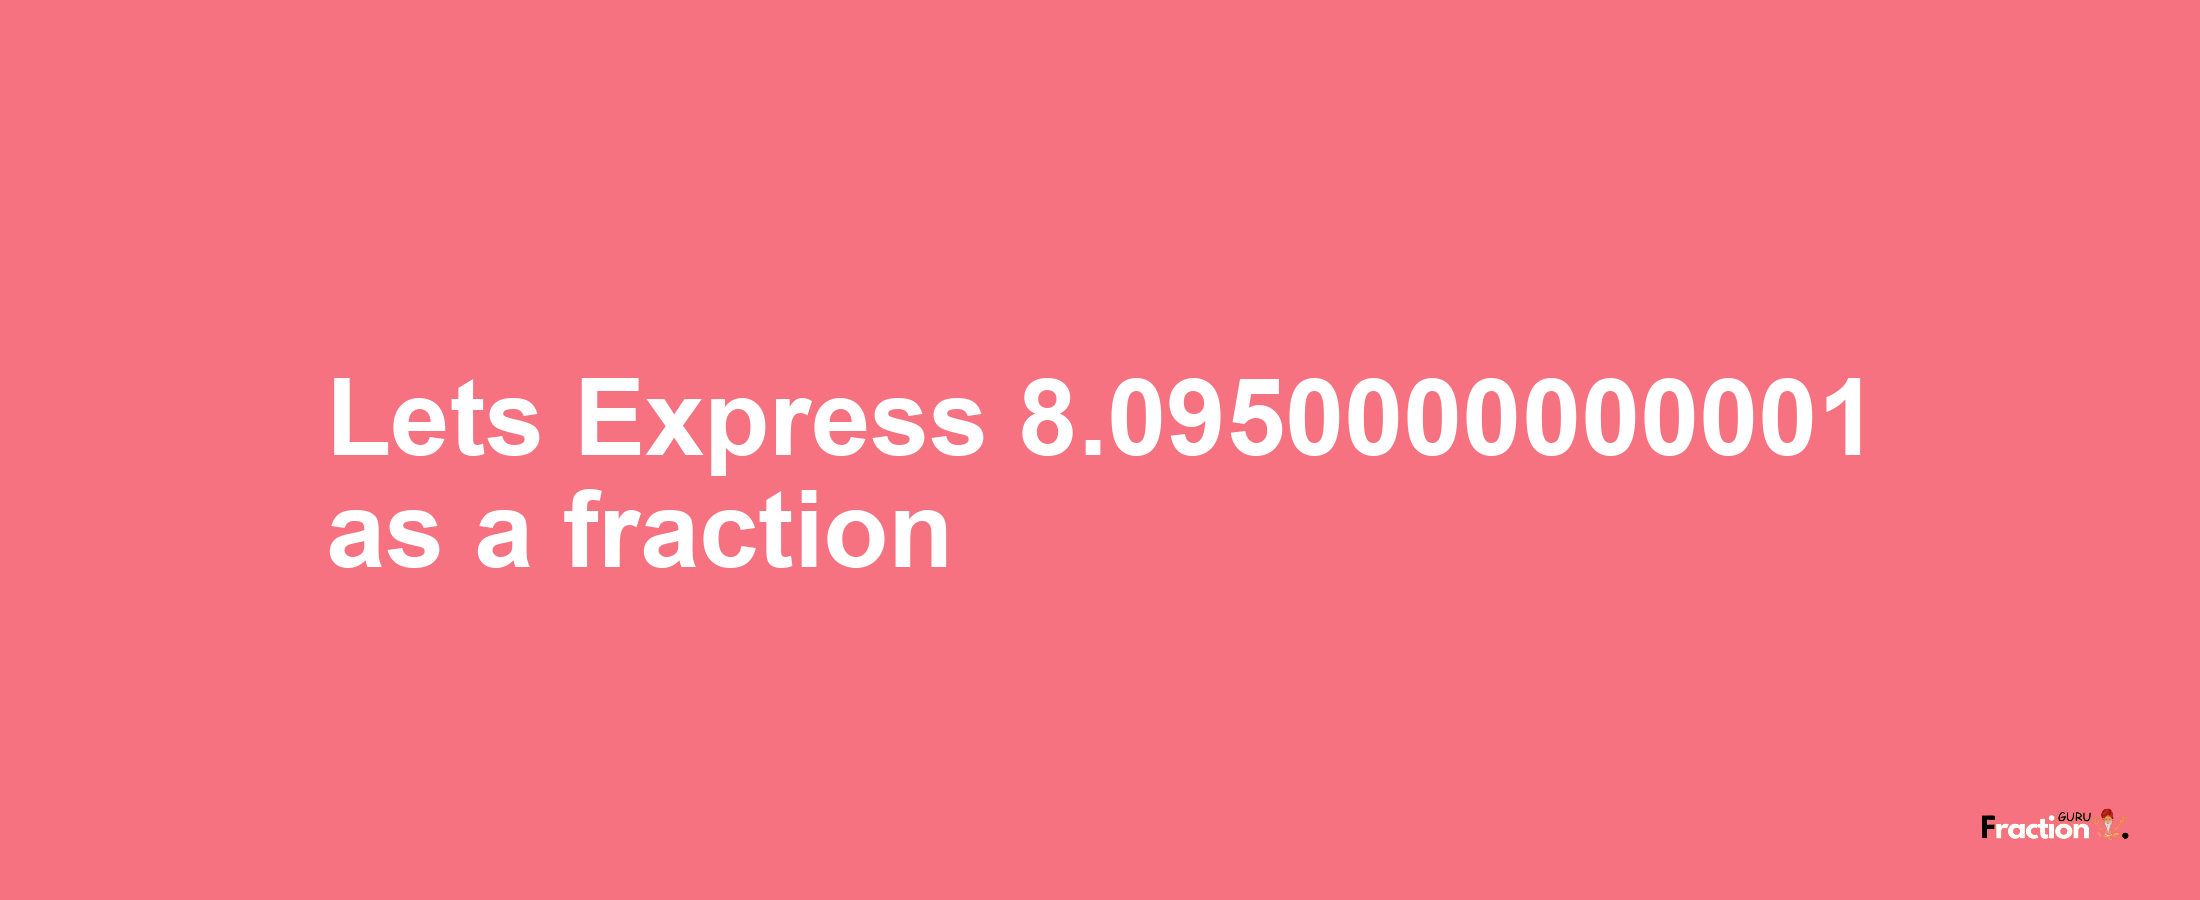 Lets Express 8.0950000000001 as afraction